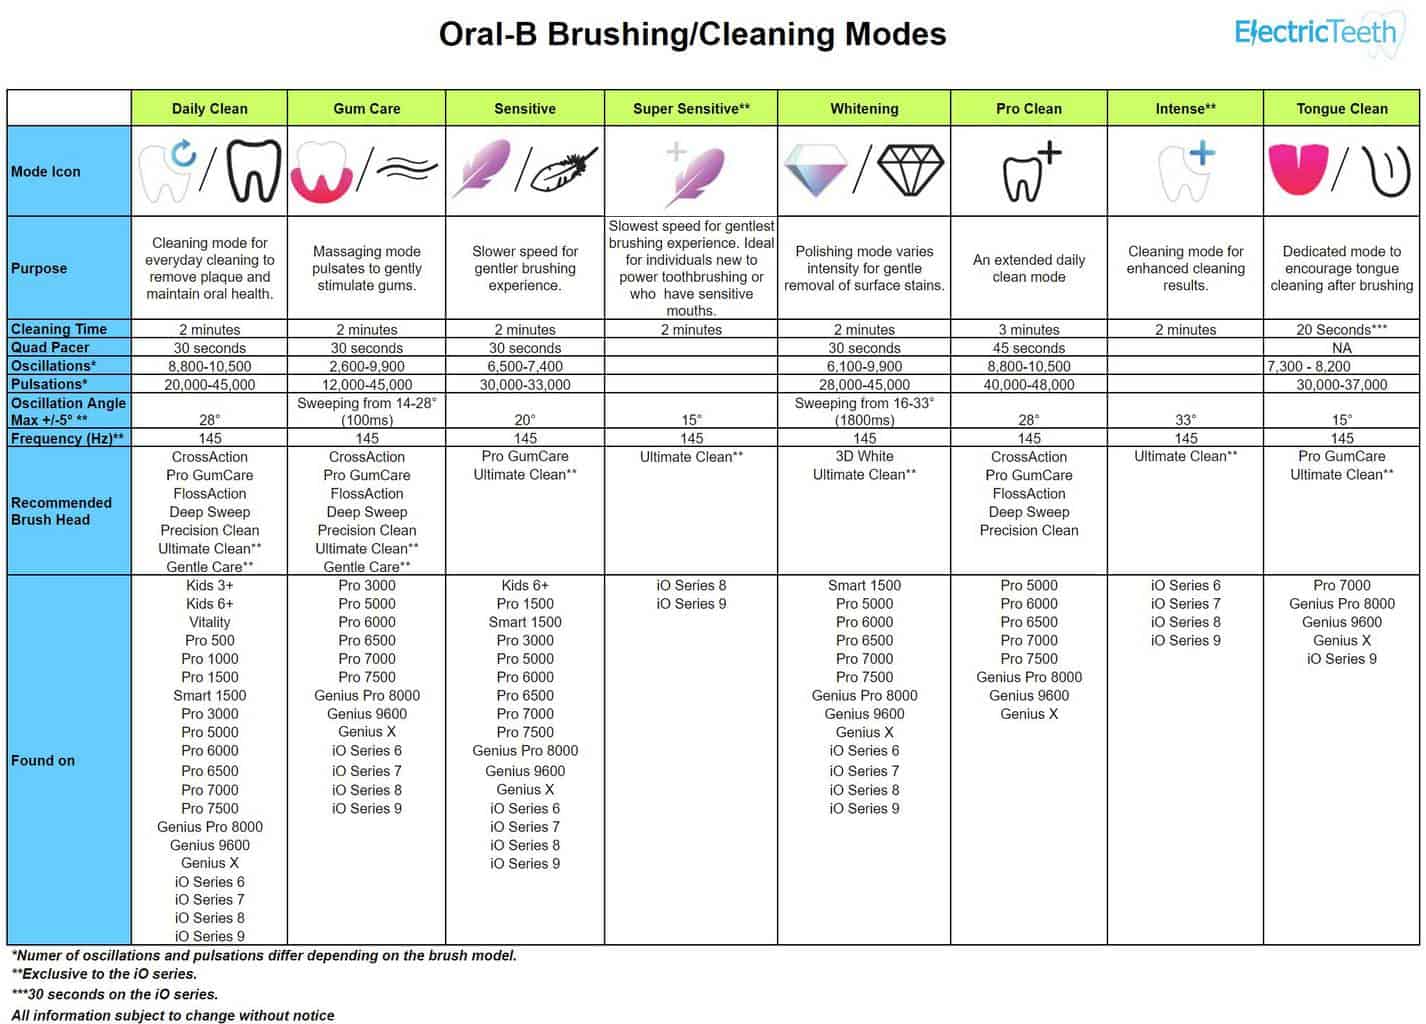 forgetful Ten years Money lending Oral-B cleaning modes explained - Electric Teeth